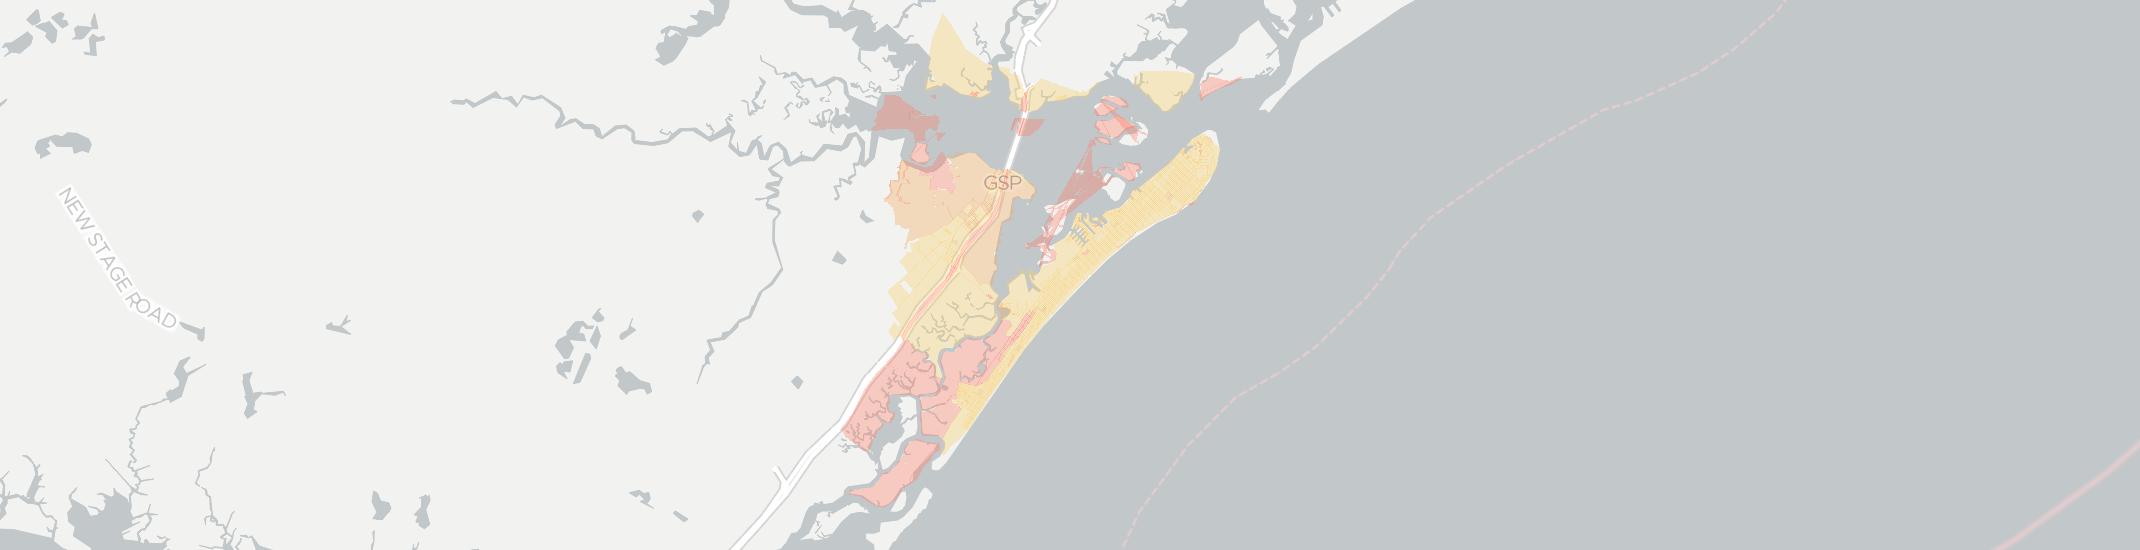 Ocean City Internet Competition Map. Click for interactive map.